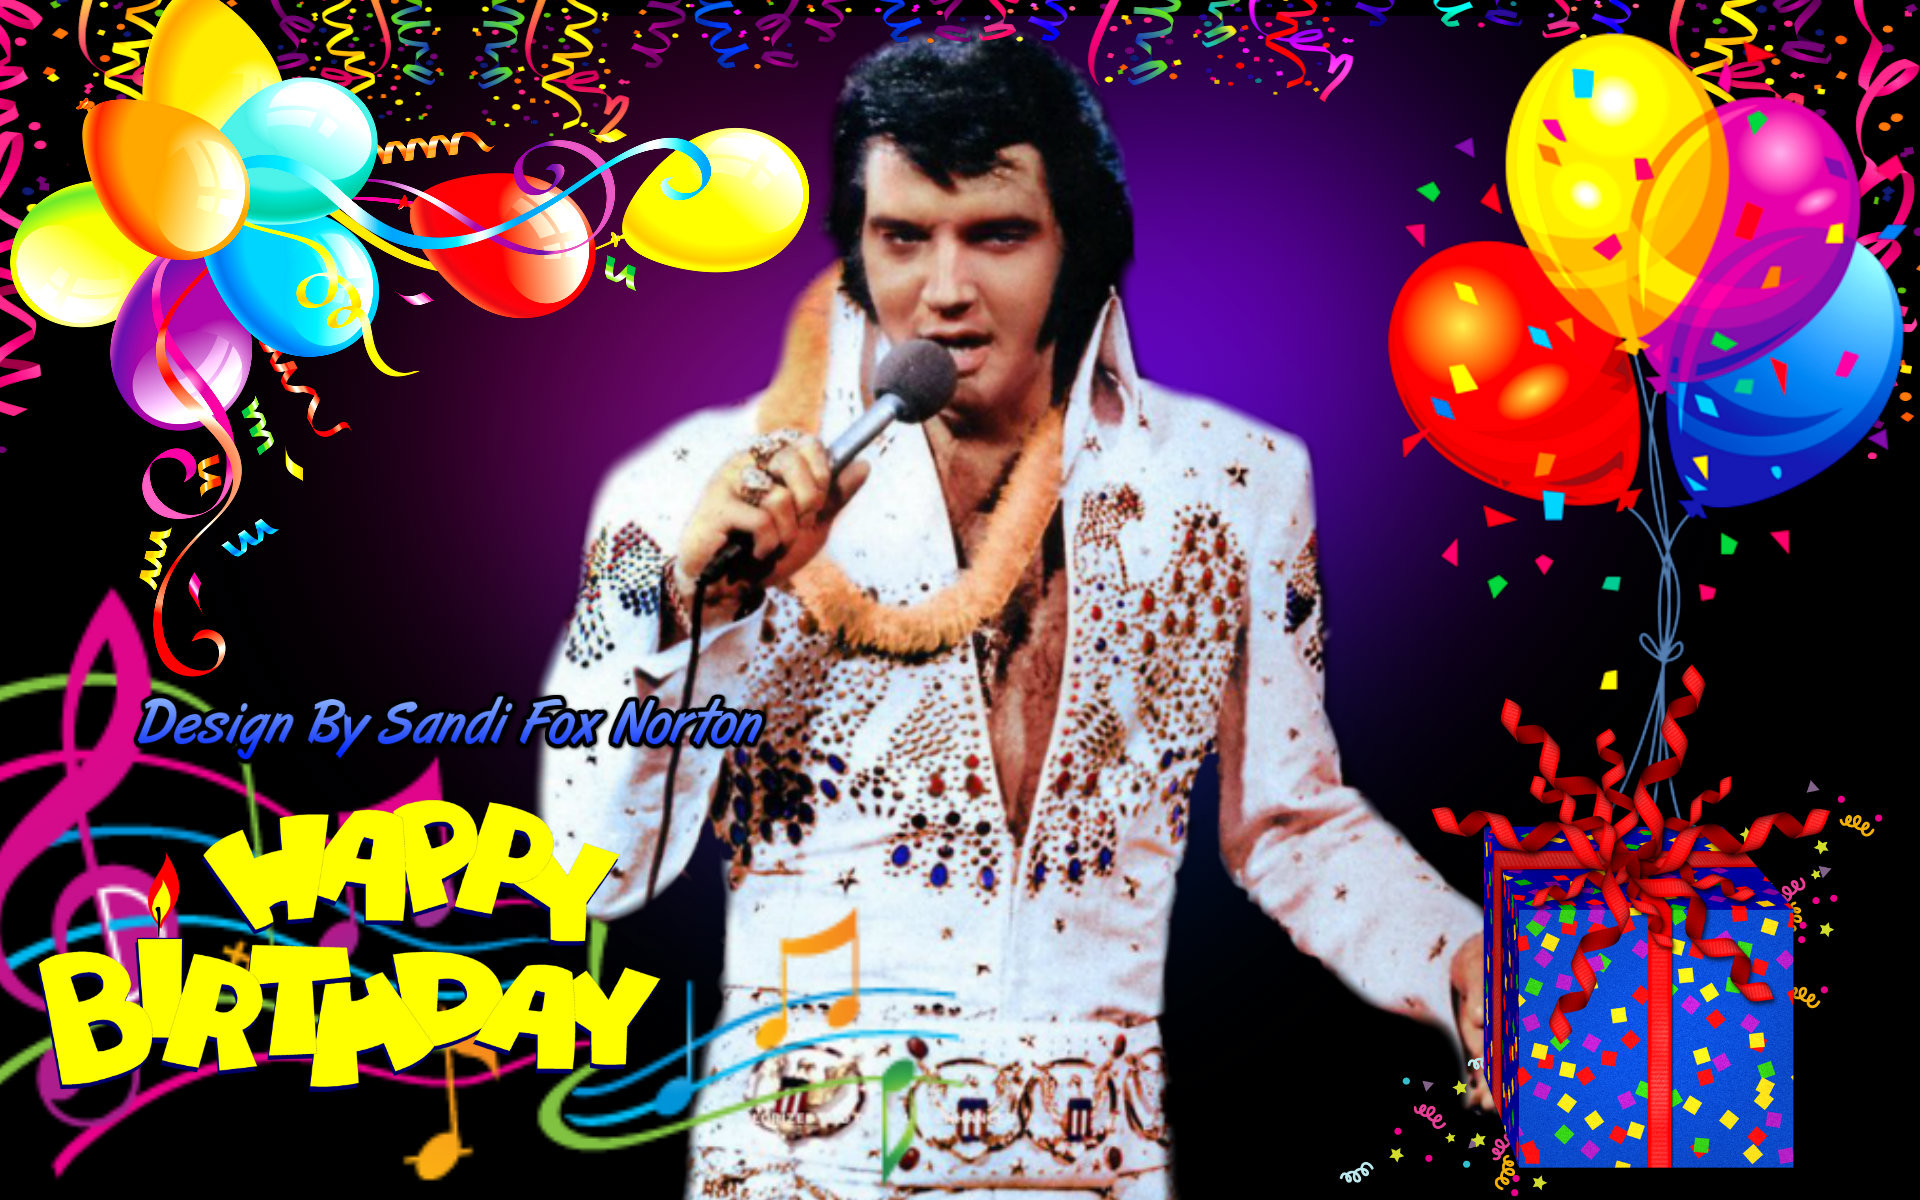 view-elvis-presley-happy-birthday-to-you-images-viral-news-channel-live